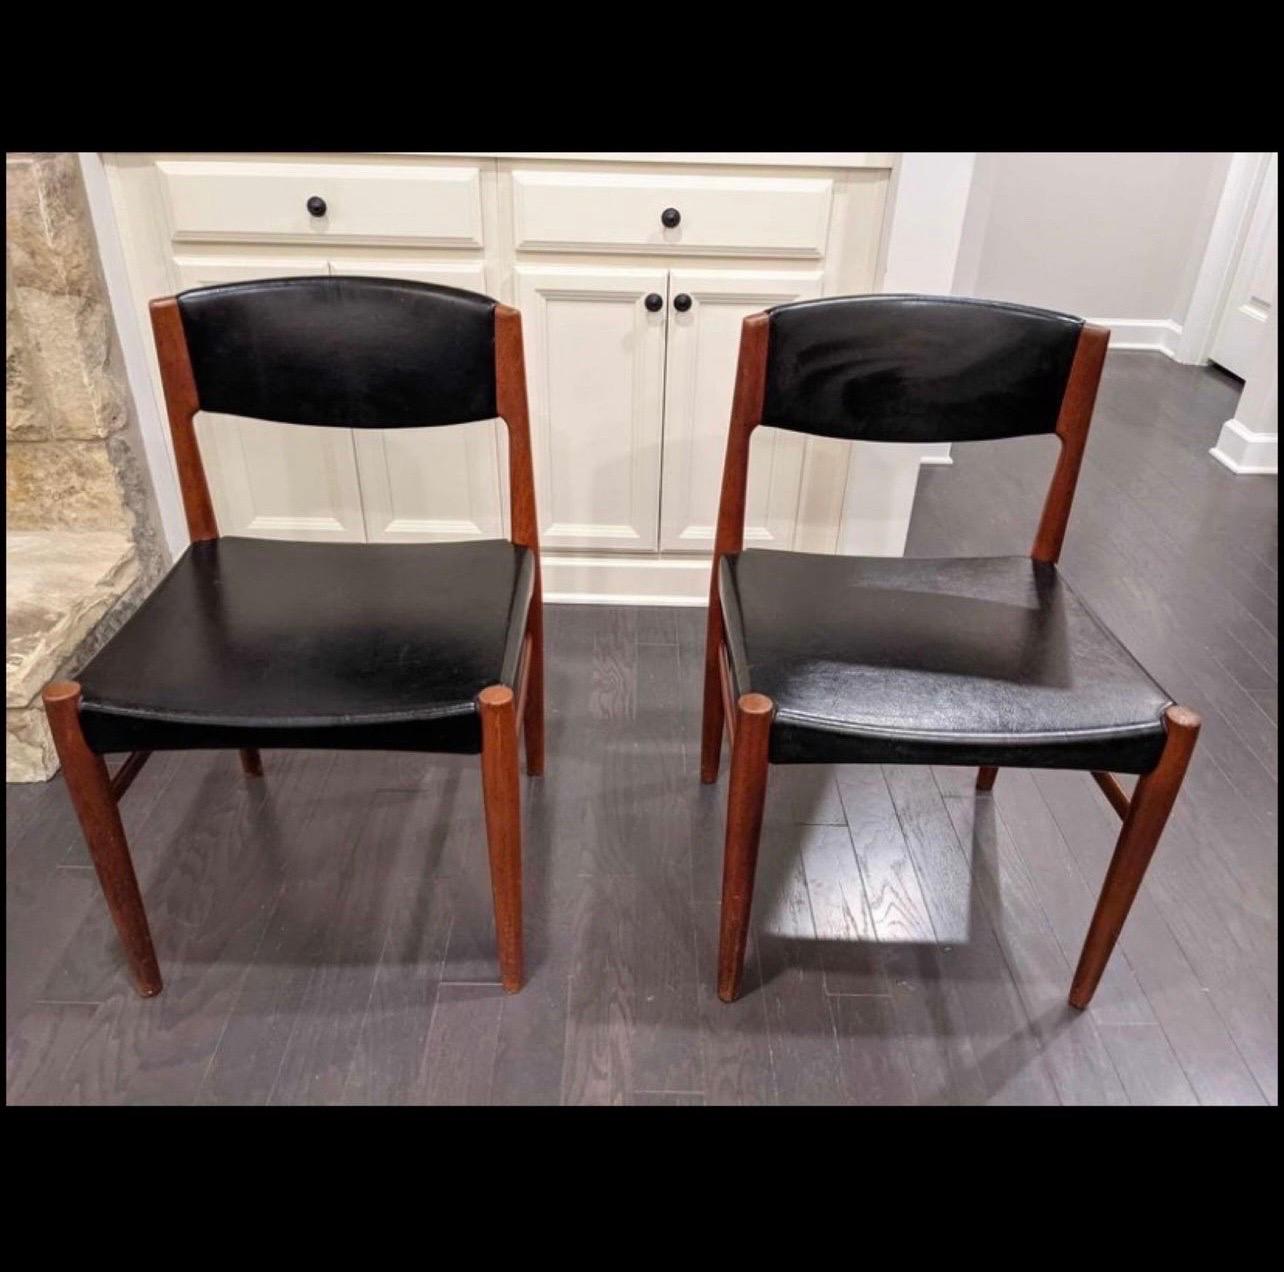 Danish Teak Dining Chairs from Glostrup, 1960s, Set of 2
Dining room chairs from Glostrup from the 1960s.
Covered with the original skai leather.
Their Scandinavian lines and their minimalist and sober design bring them a lot of elegance and